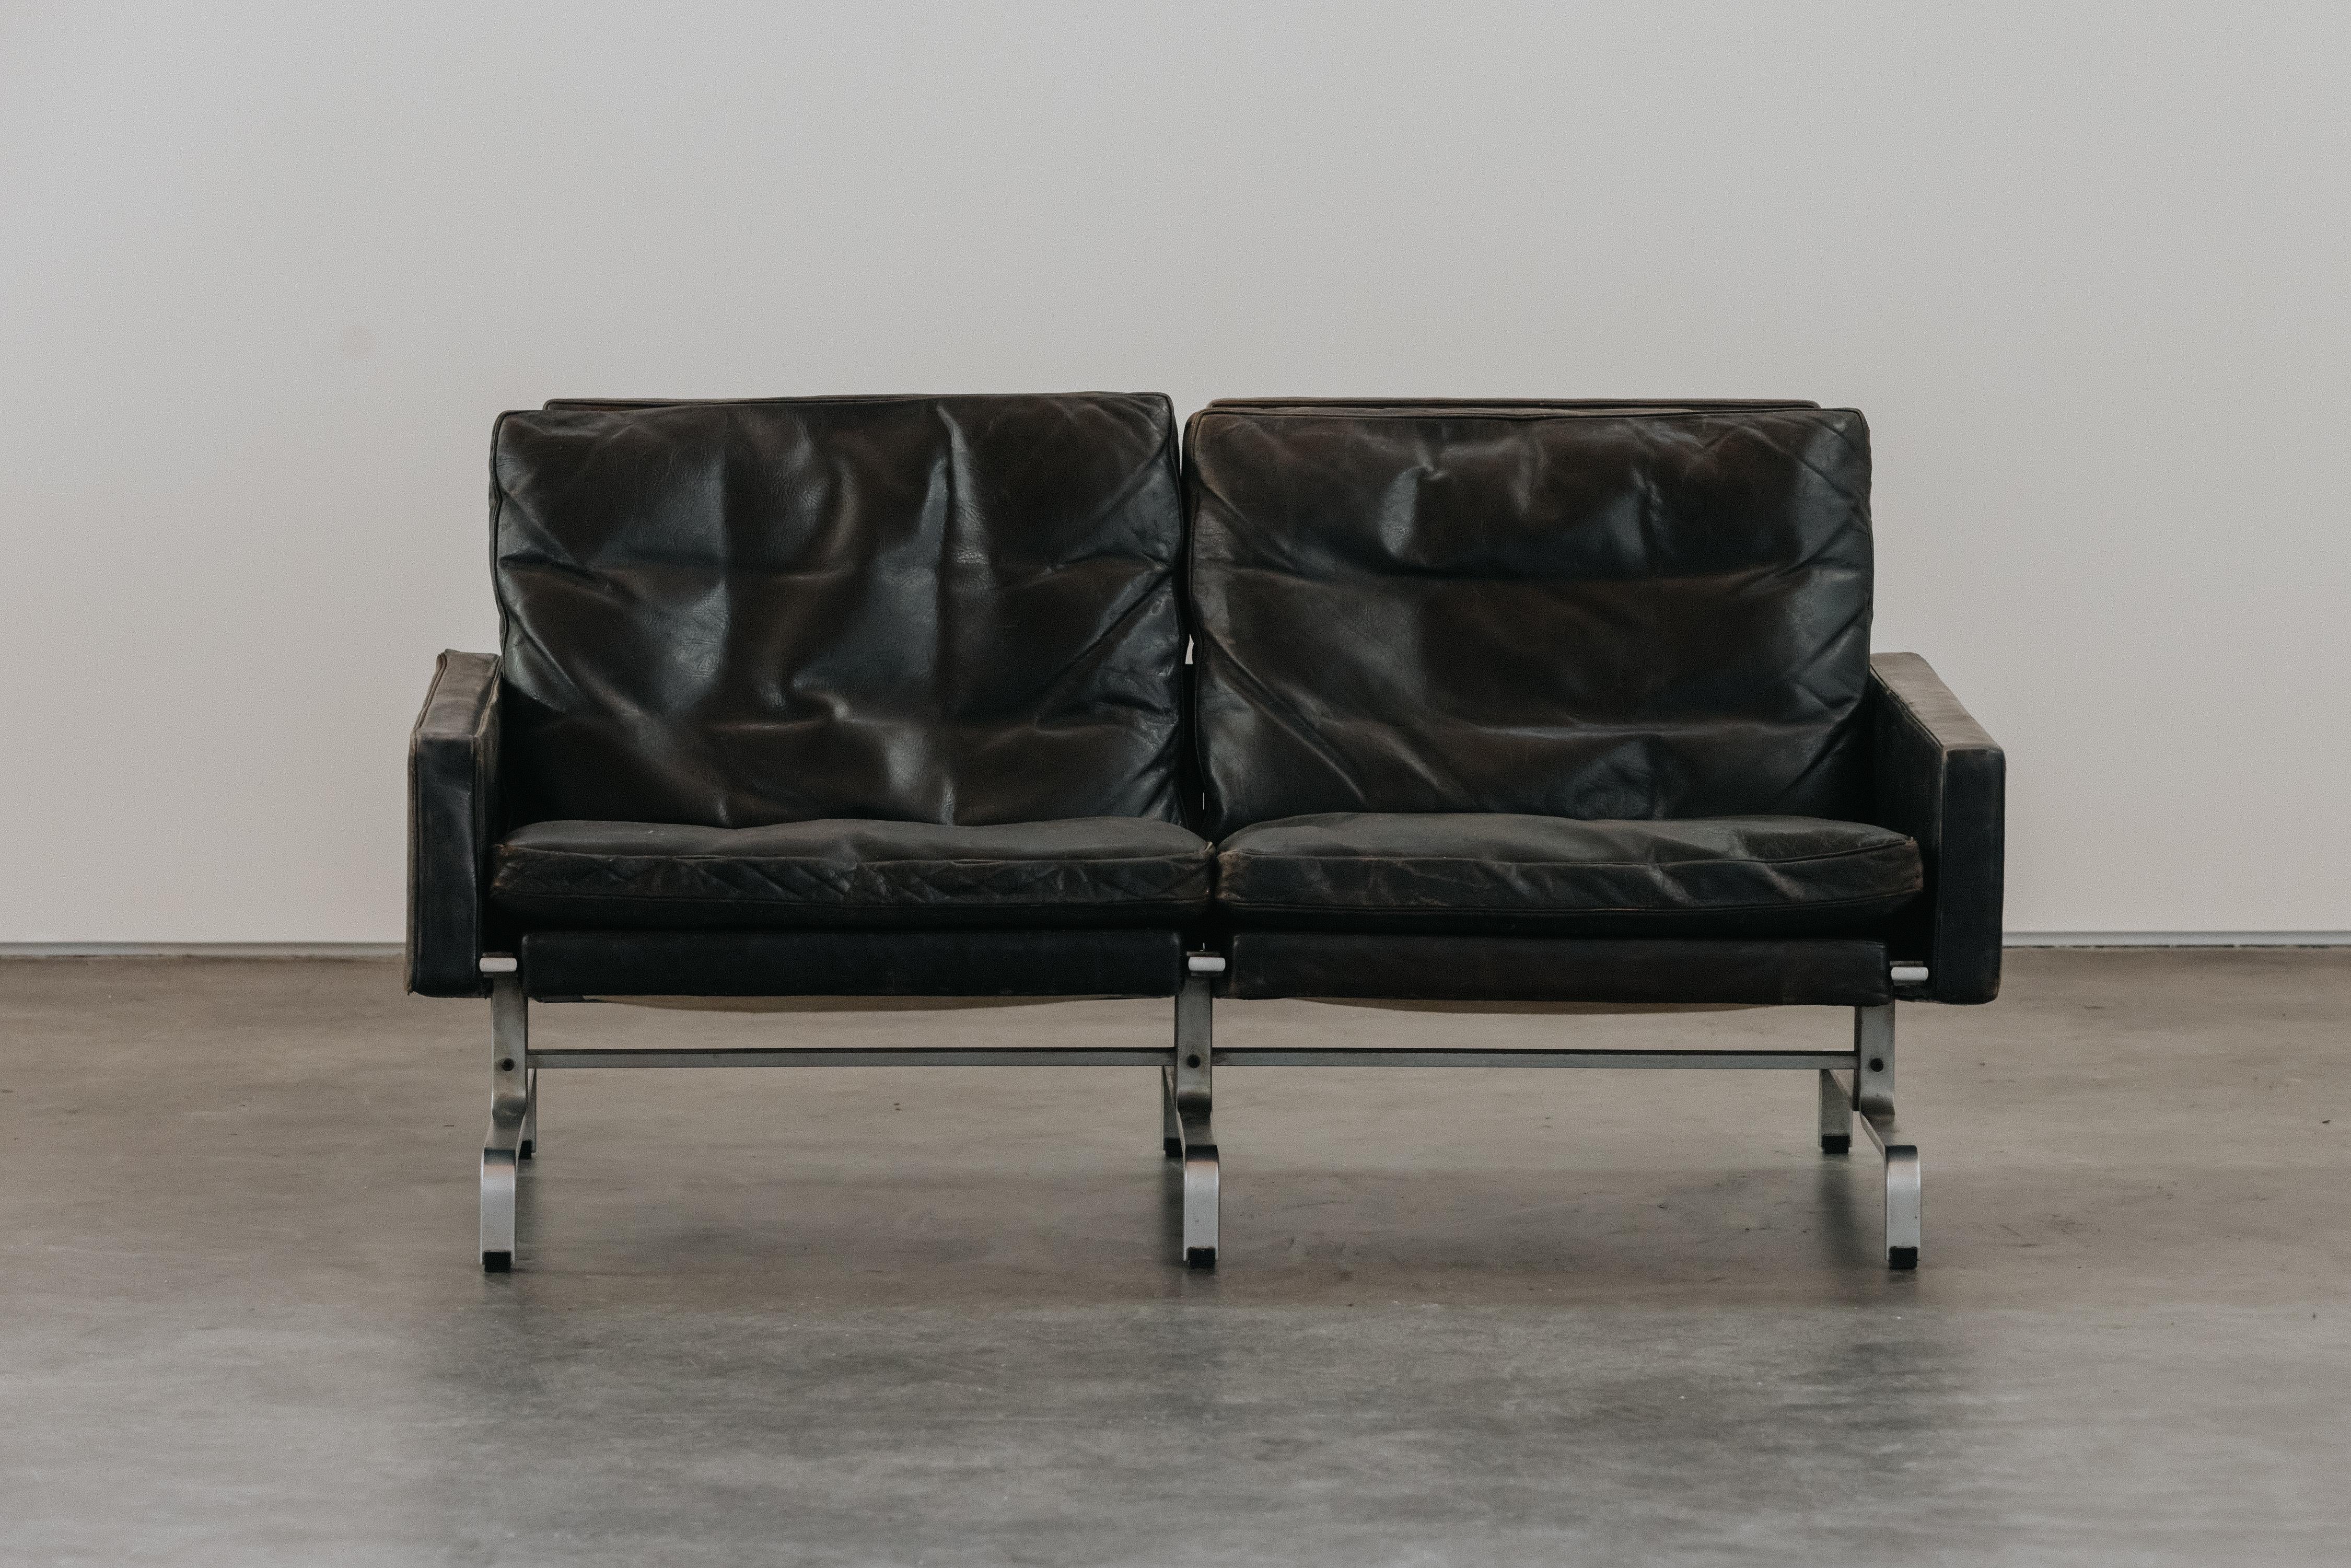 Vintage Poul Kjærholm PK-31/2 Sofa by E. Kold Christensen From Denmark, 1950.  Original black leather upholstery with great patina on a solid chrome base.